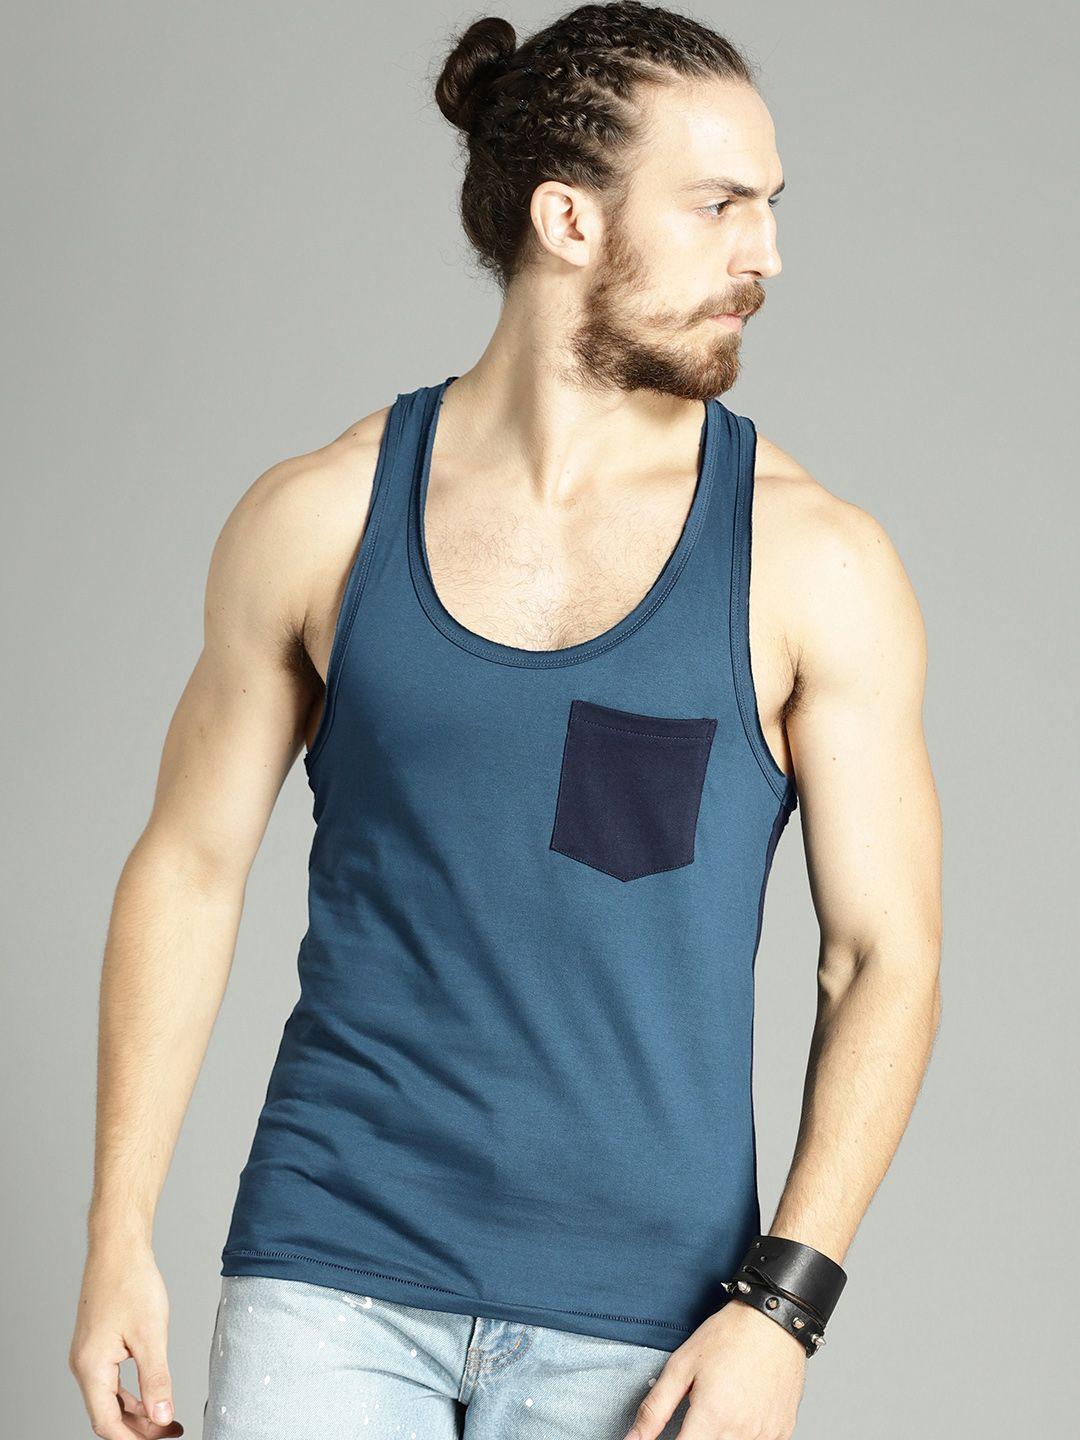 roadster time travlr men teal blue sleveless t-shirt with raw edges